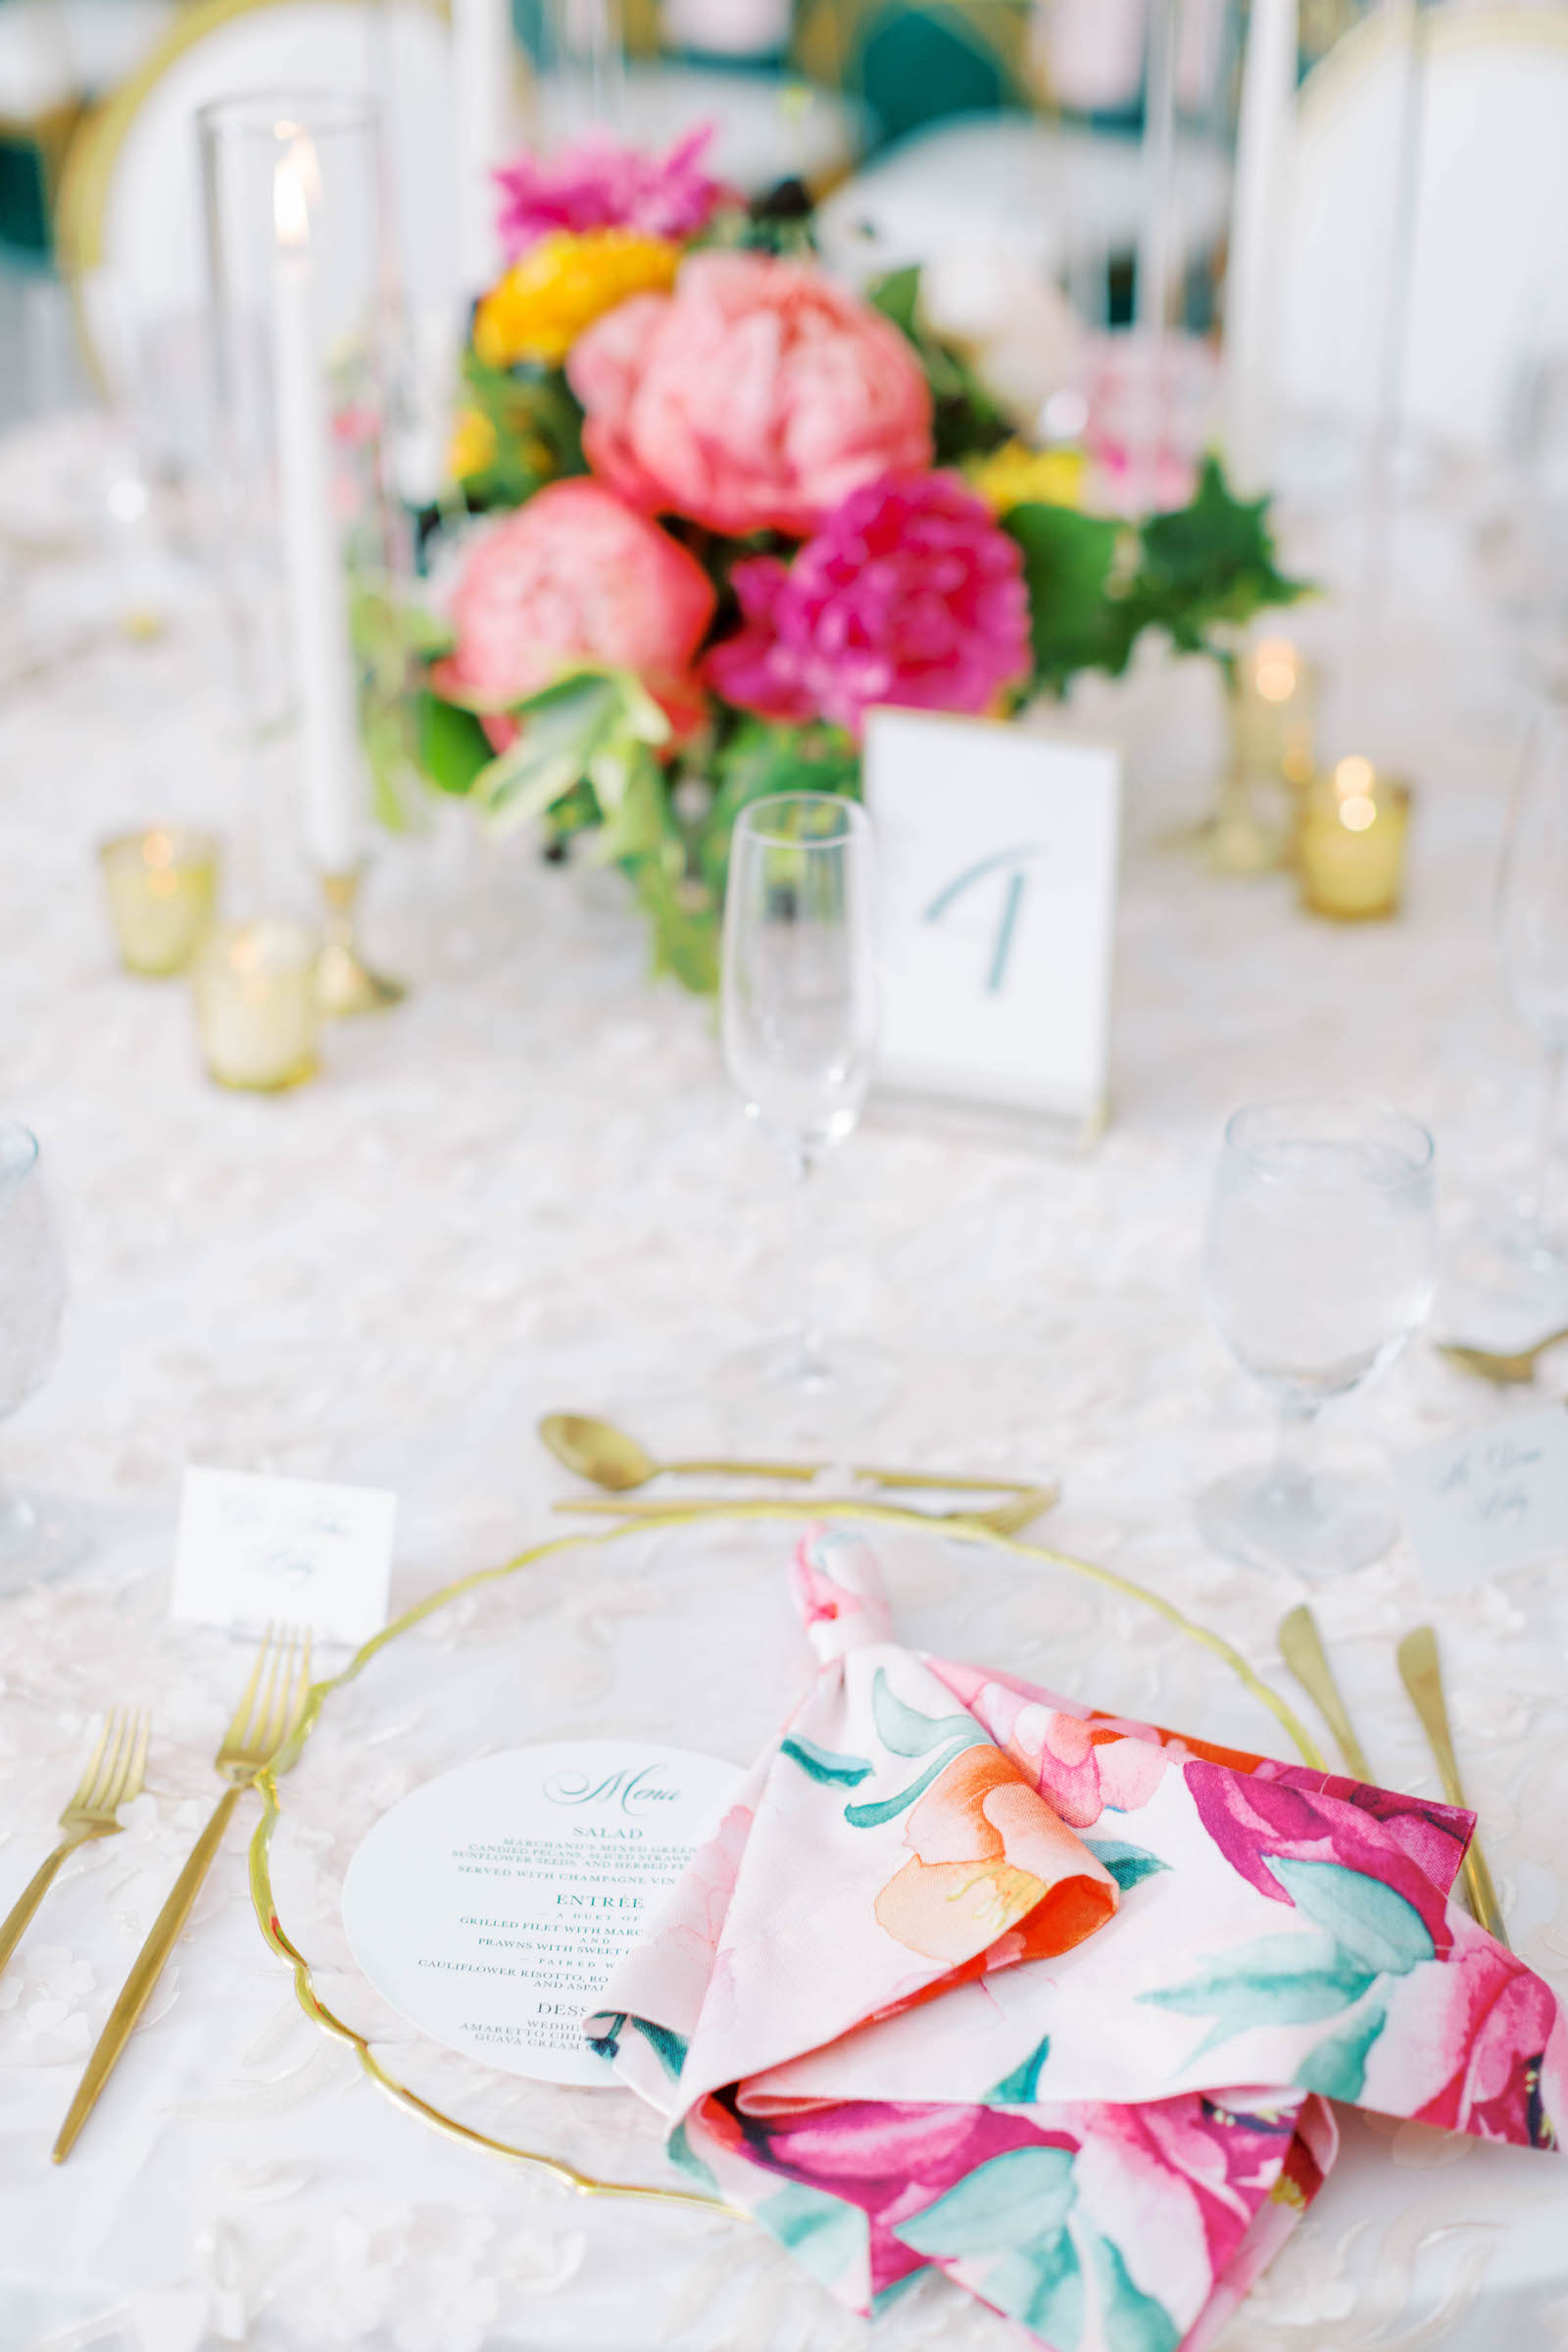 Clear Plates with Gold Rim and Gold Flatware | Floral Napkin and Matching Floral Peony Centerpieces